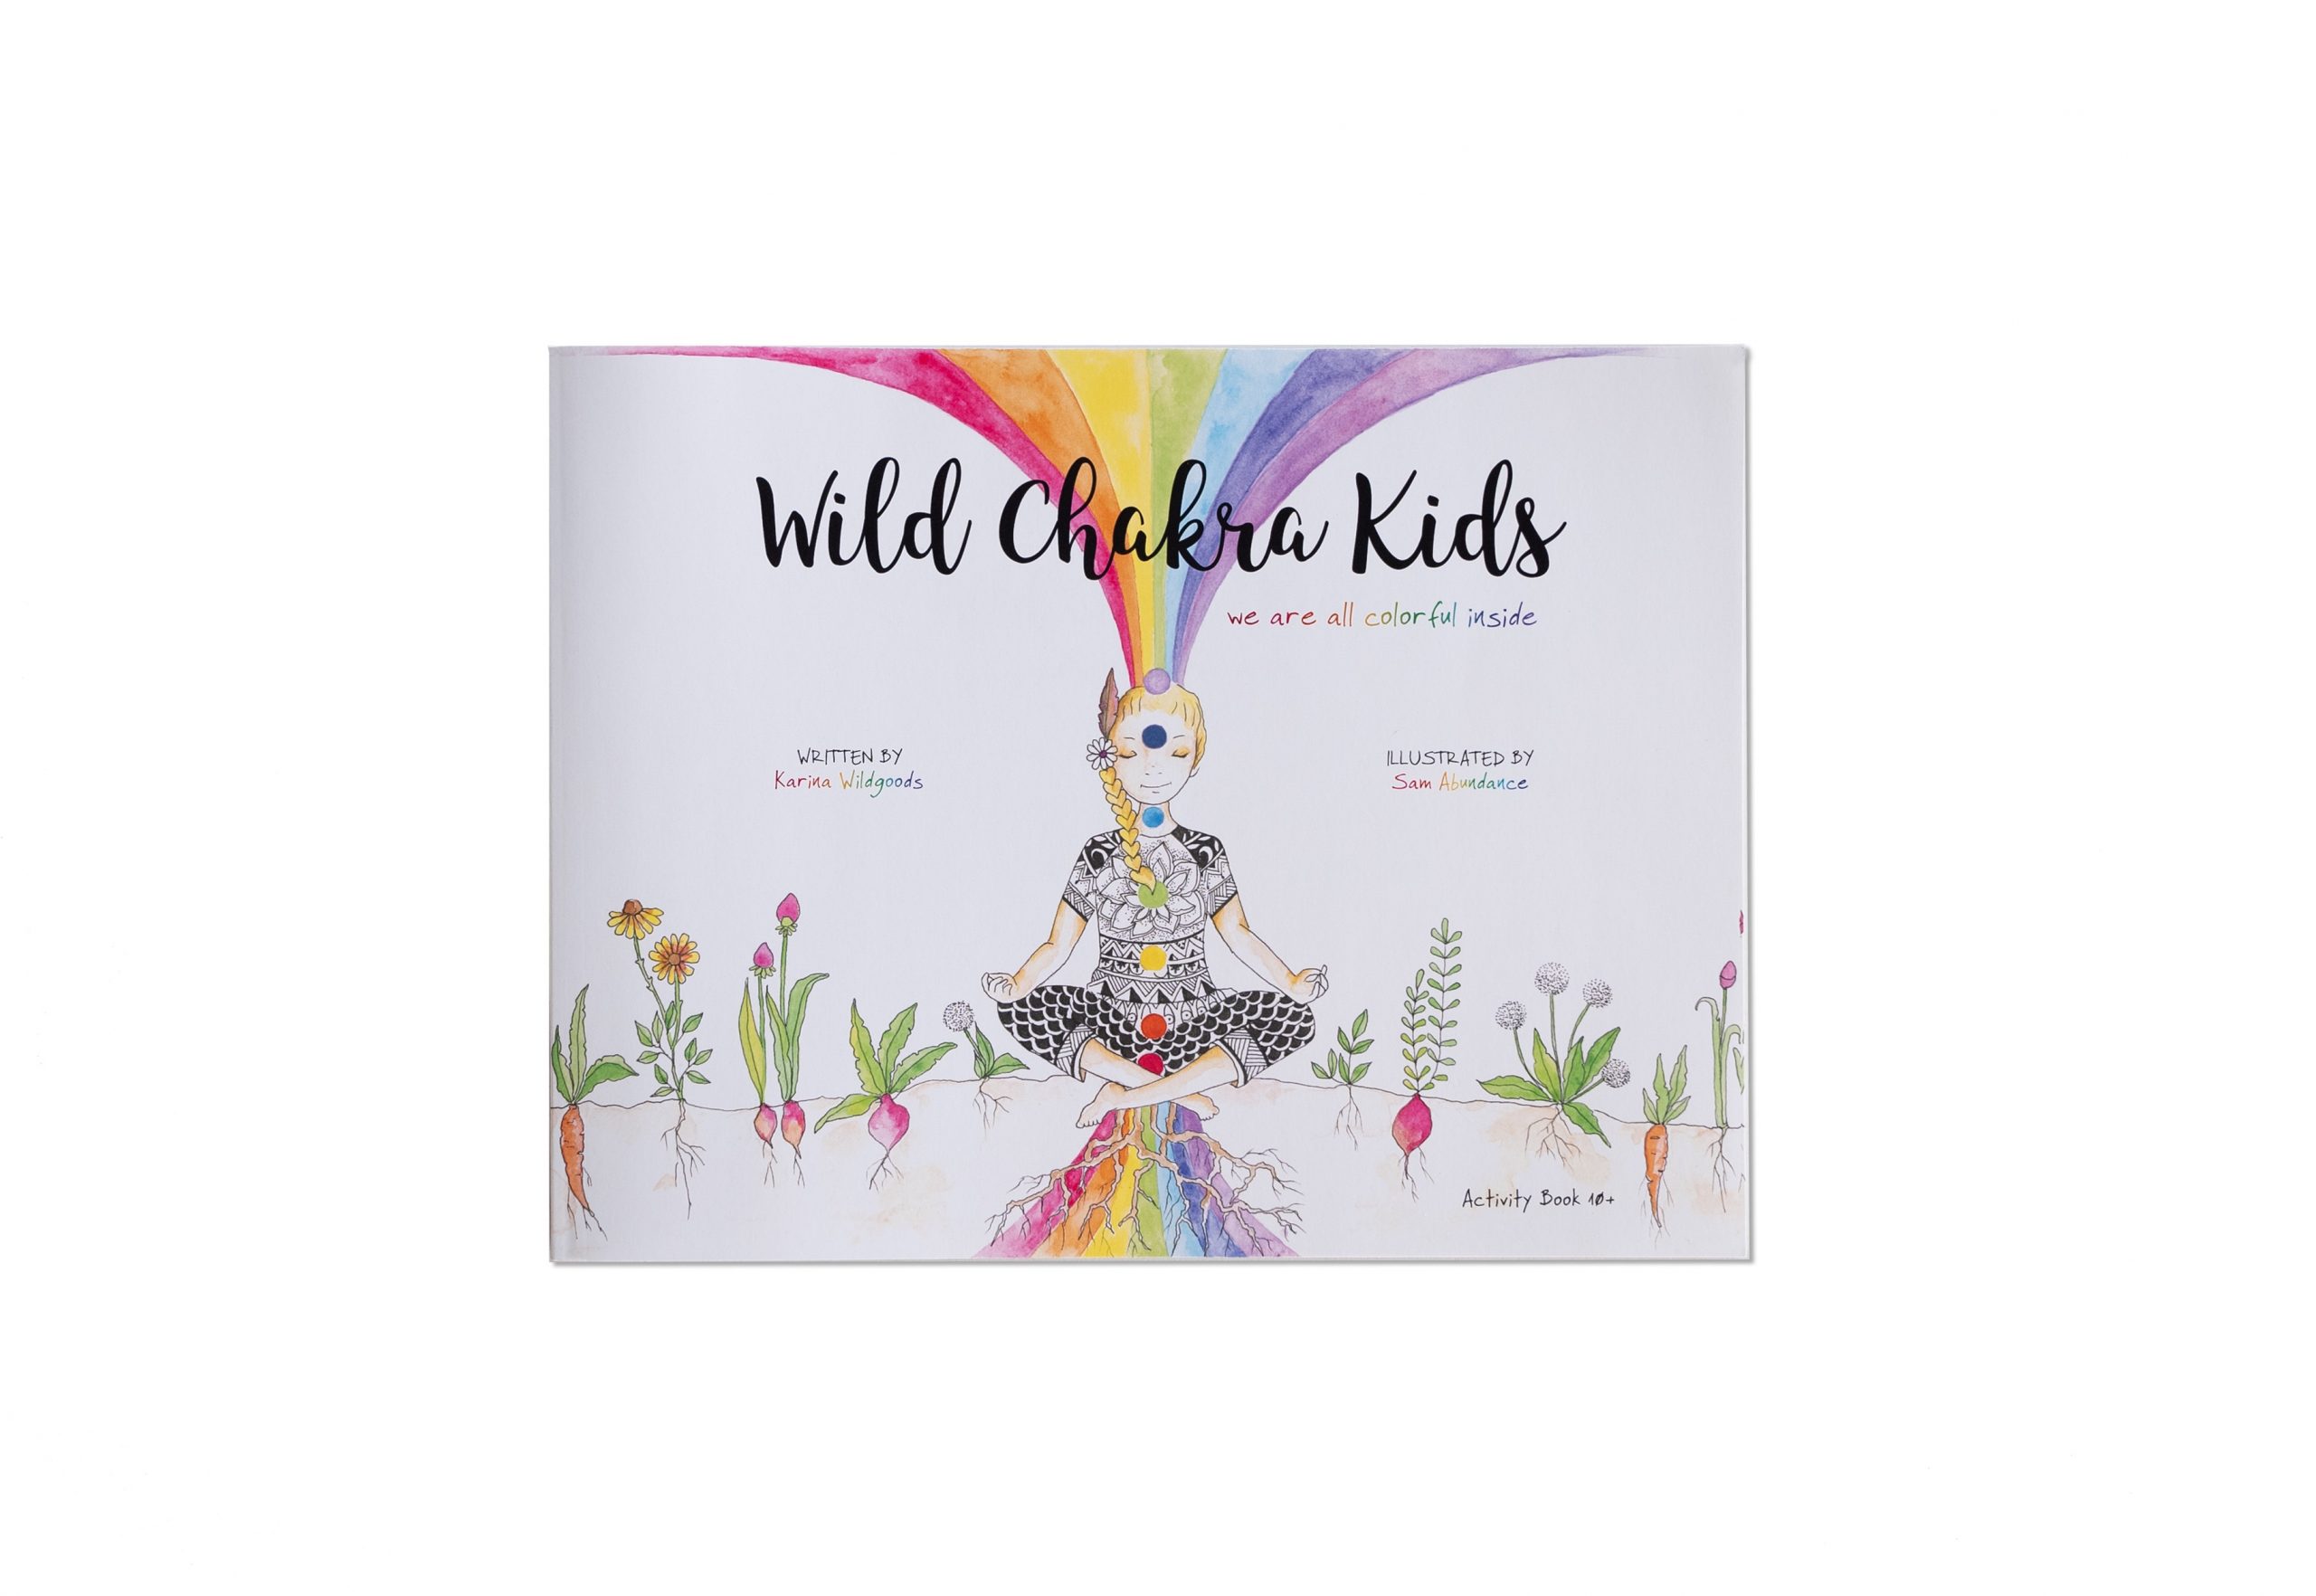 Wild Chakra Kids Colouring Book  10+, “we are all colorful inside”